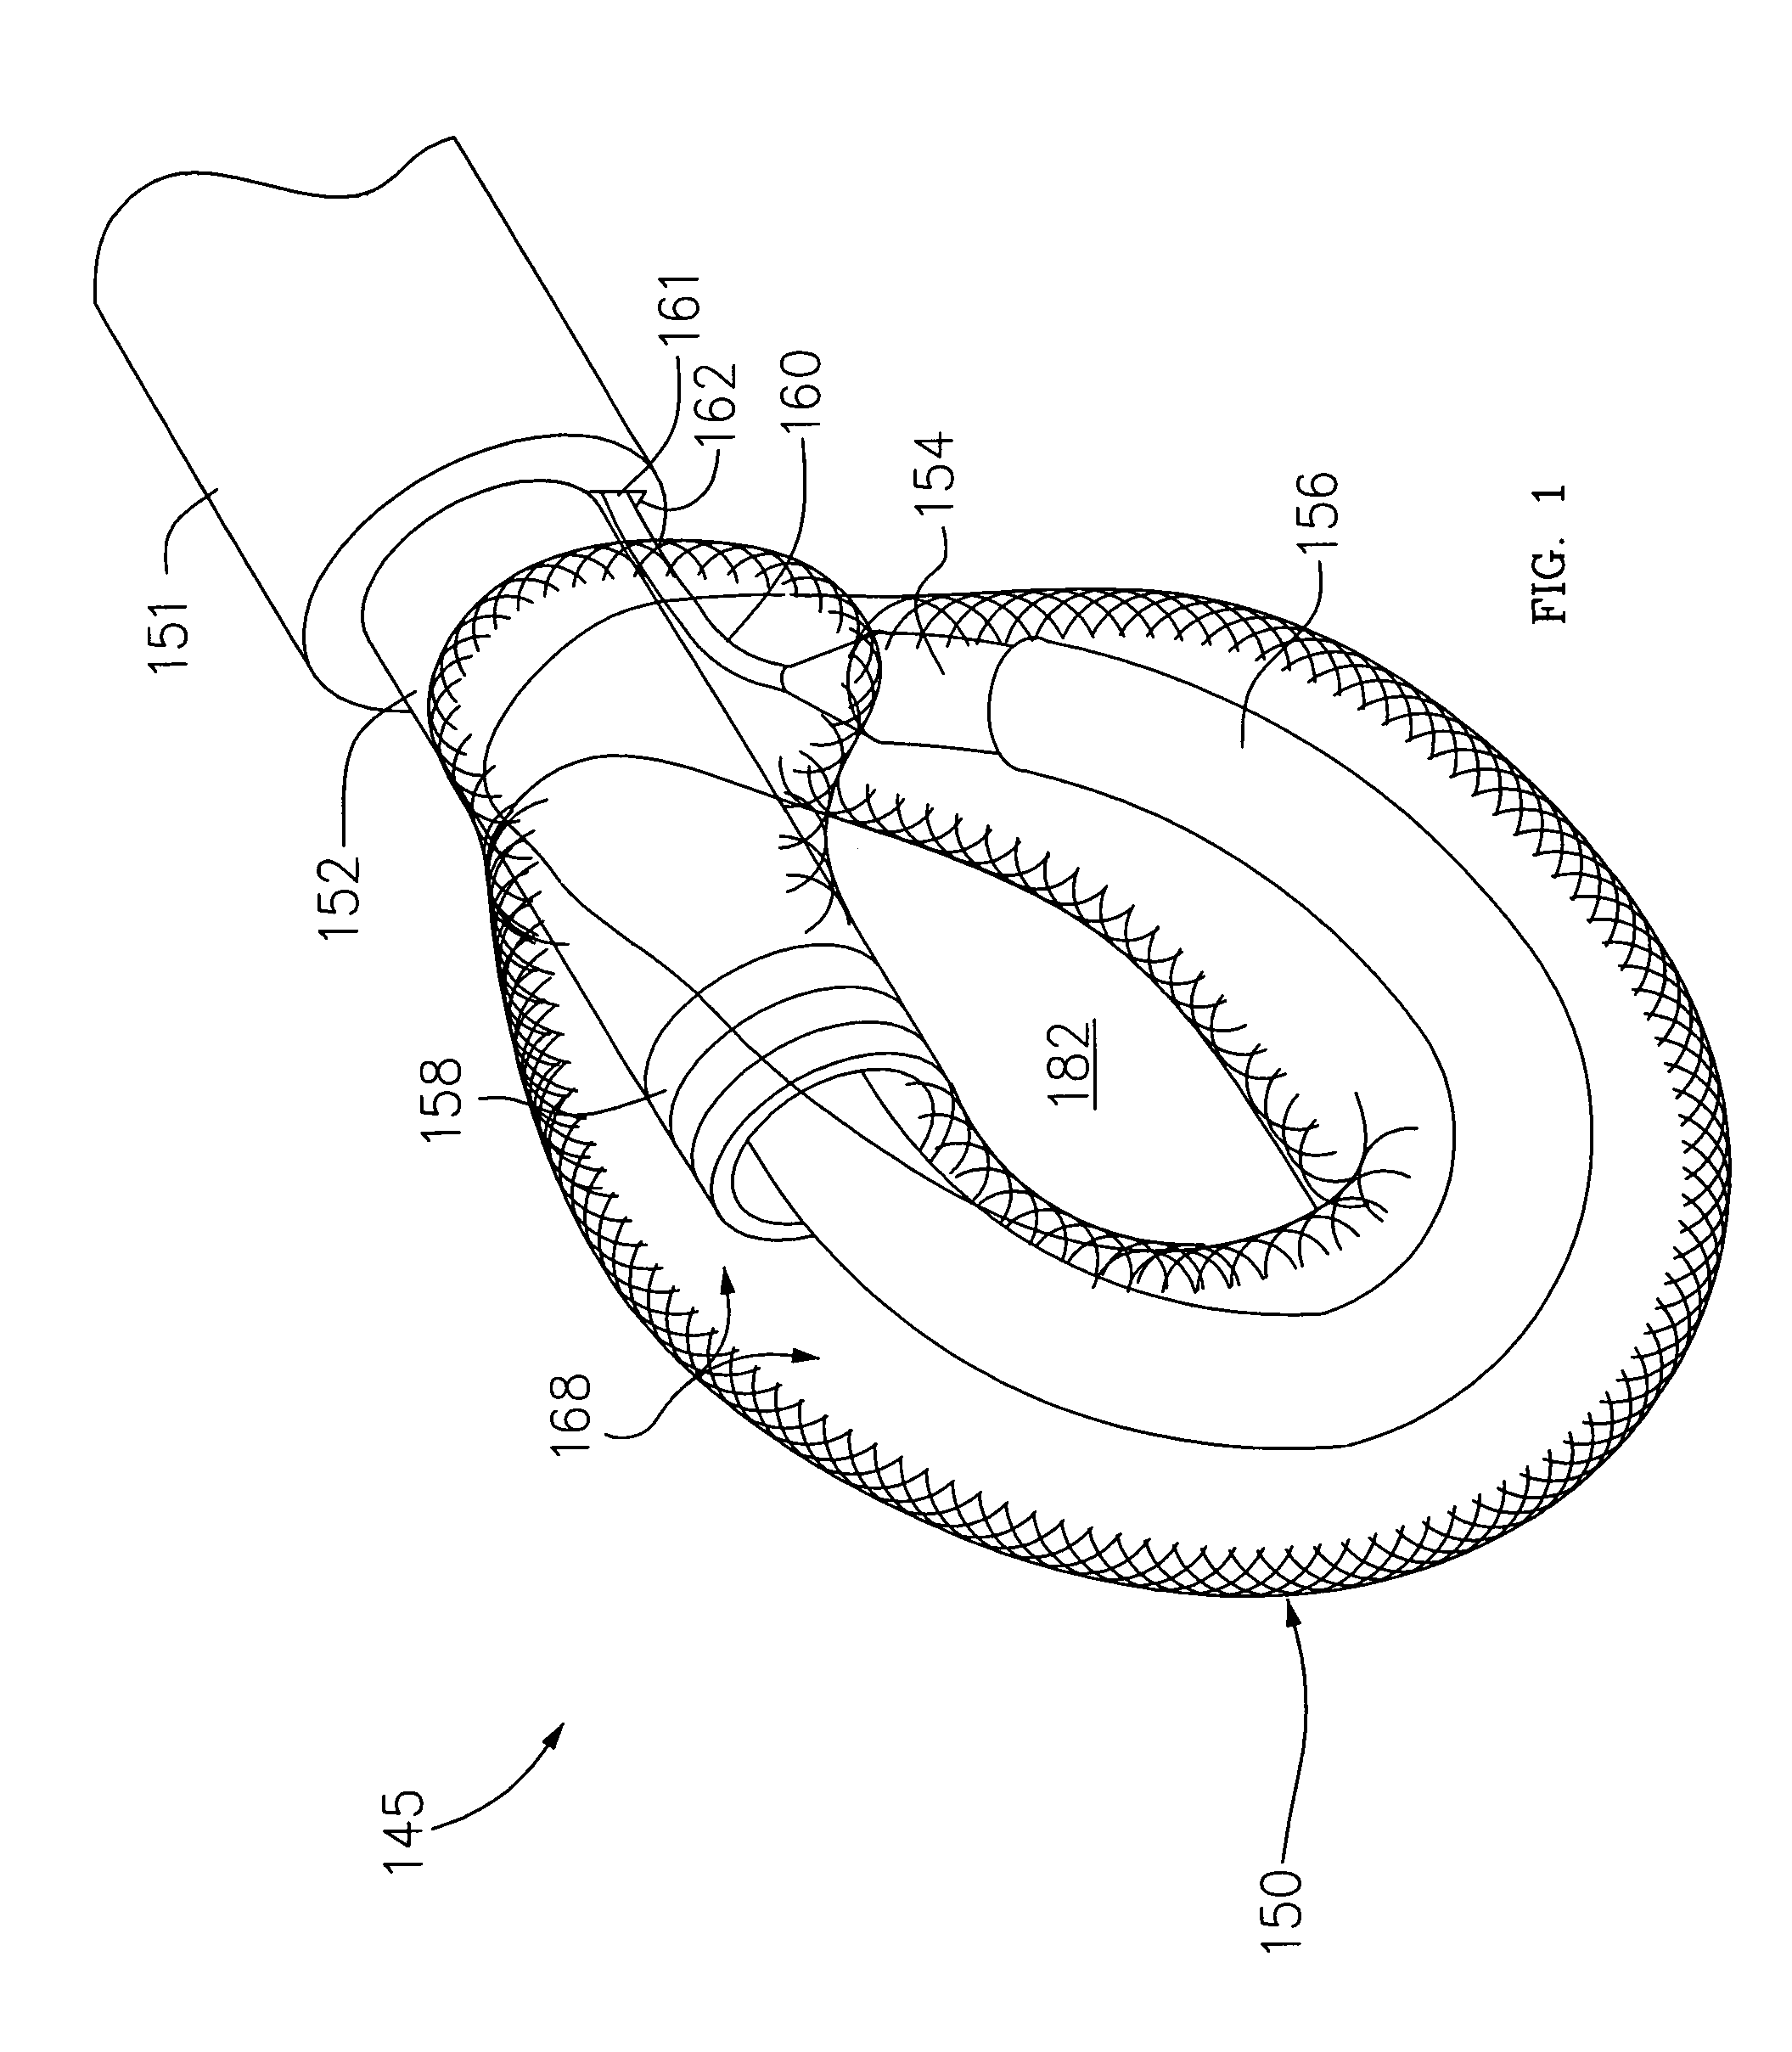 Mechanical apparatus and method for delivering materials into the inter-vertebral body space for nucleus replacement